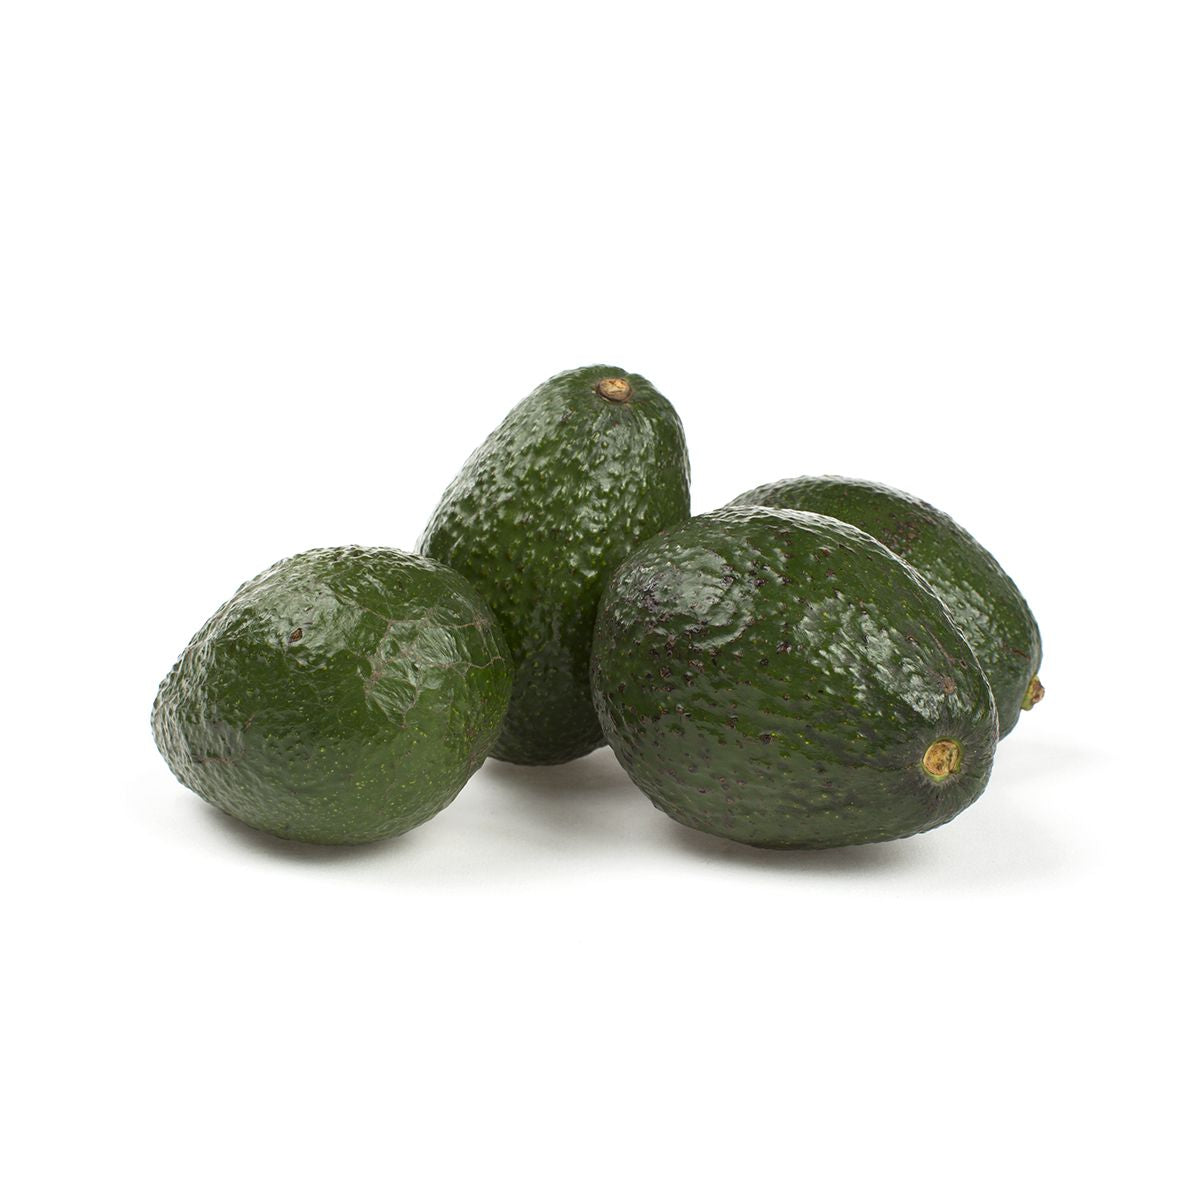 Avocados From Mexico Firm Hass Avocados 60 Ct